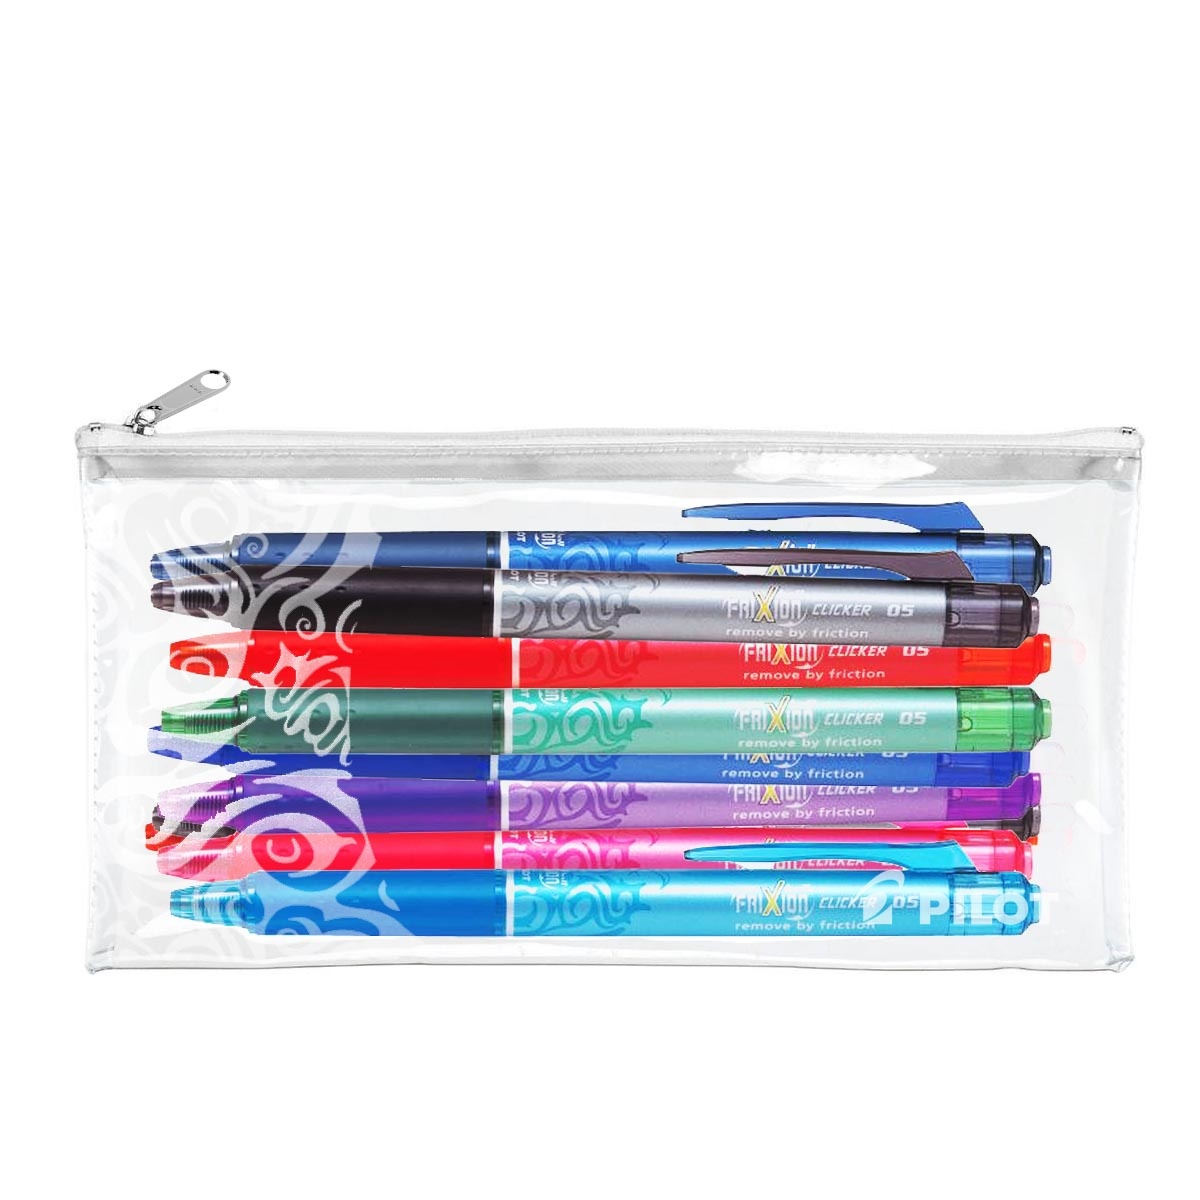 FriXion Clicker 0.5 10-set in the group Pens / Writing / Gel Pens at Pen Store (104863)